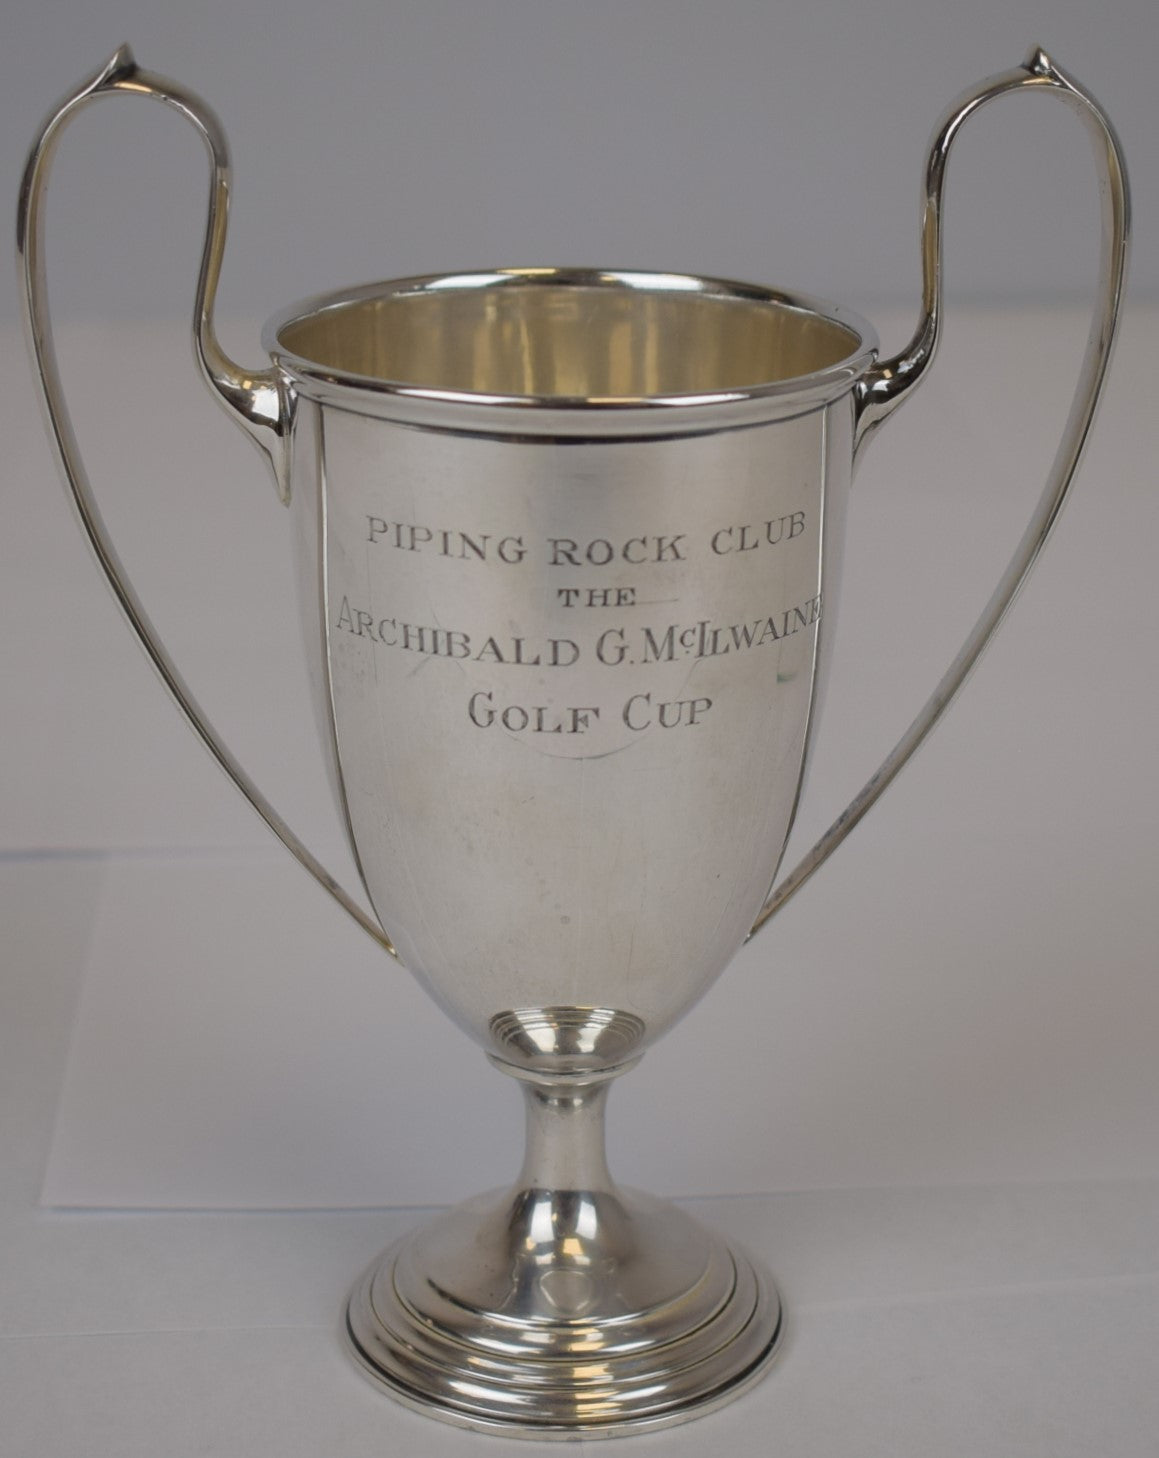 Piping Rock Club 1941 Sterling Silver Golf Trophy